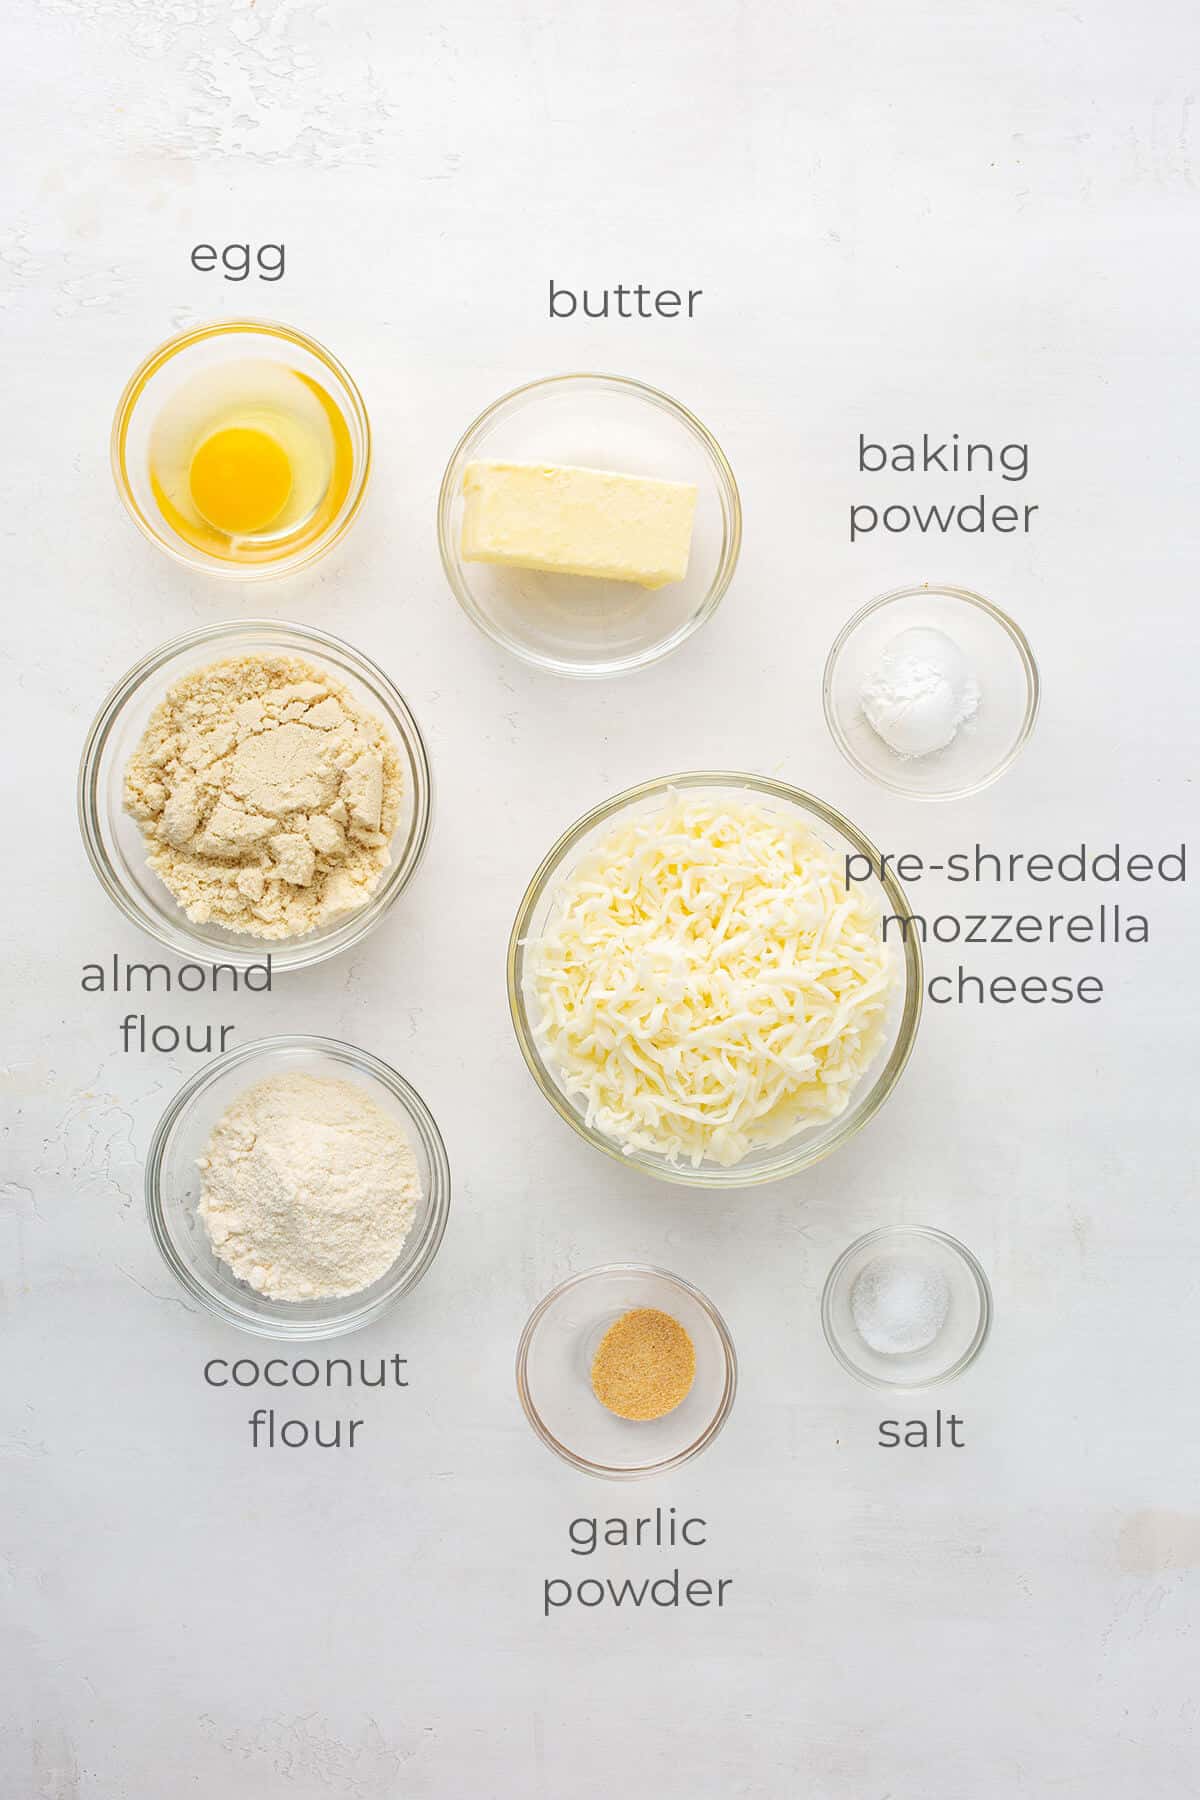 Ingredients labeled and needed to make keto pizza crust